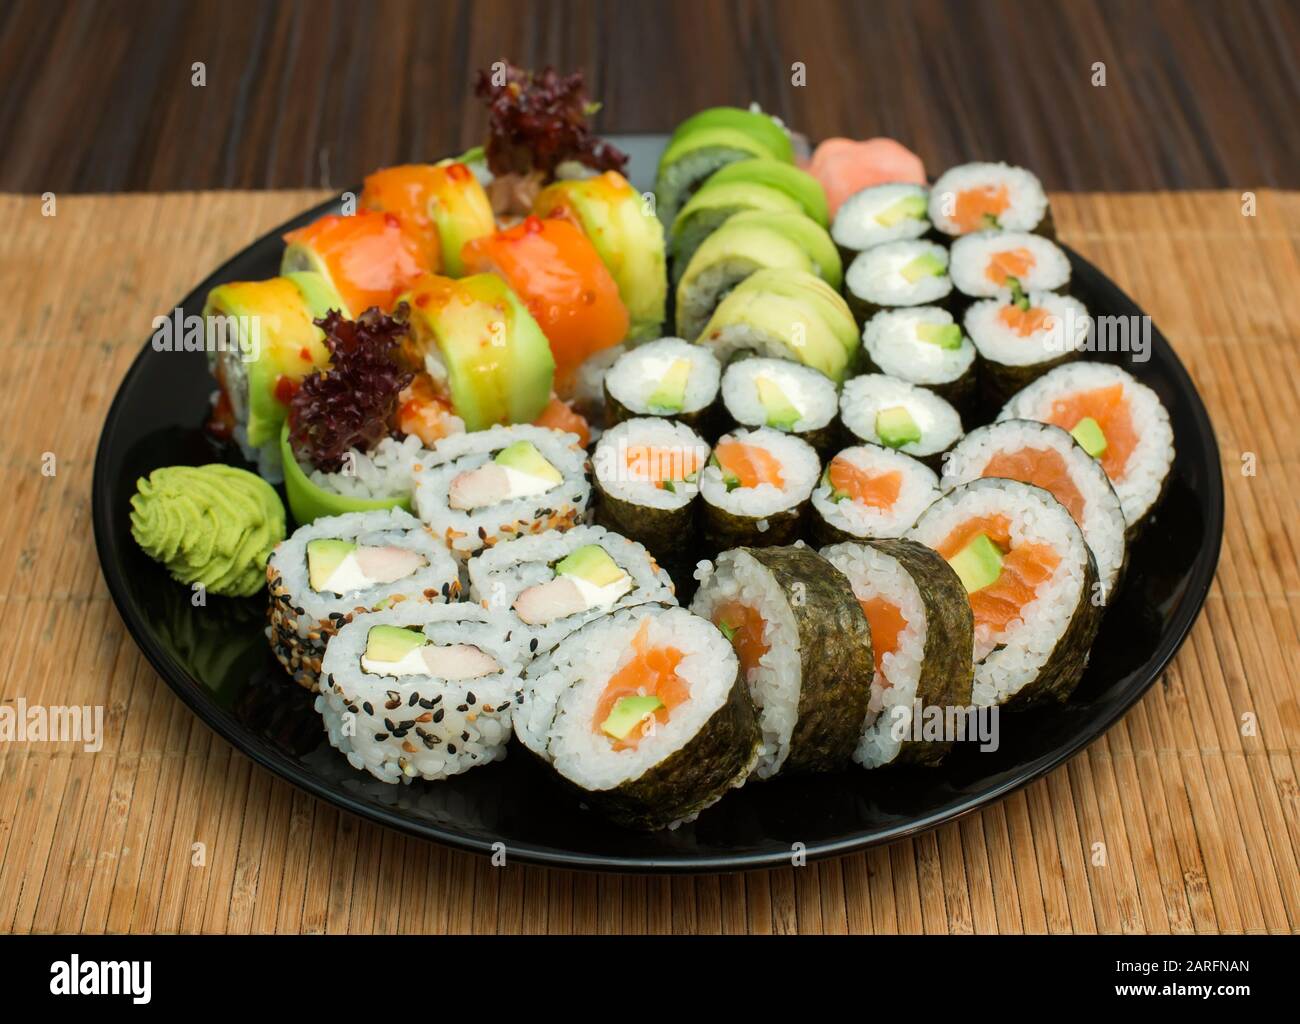 Sushi Restaurant Interior High Resolution Stock Photography and Images